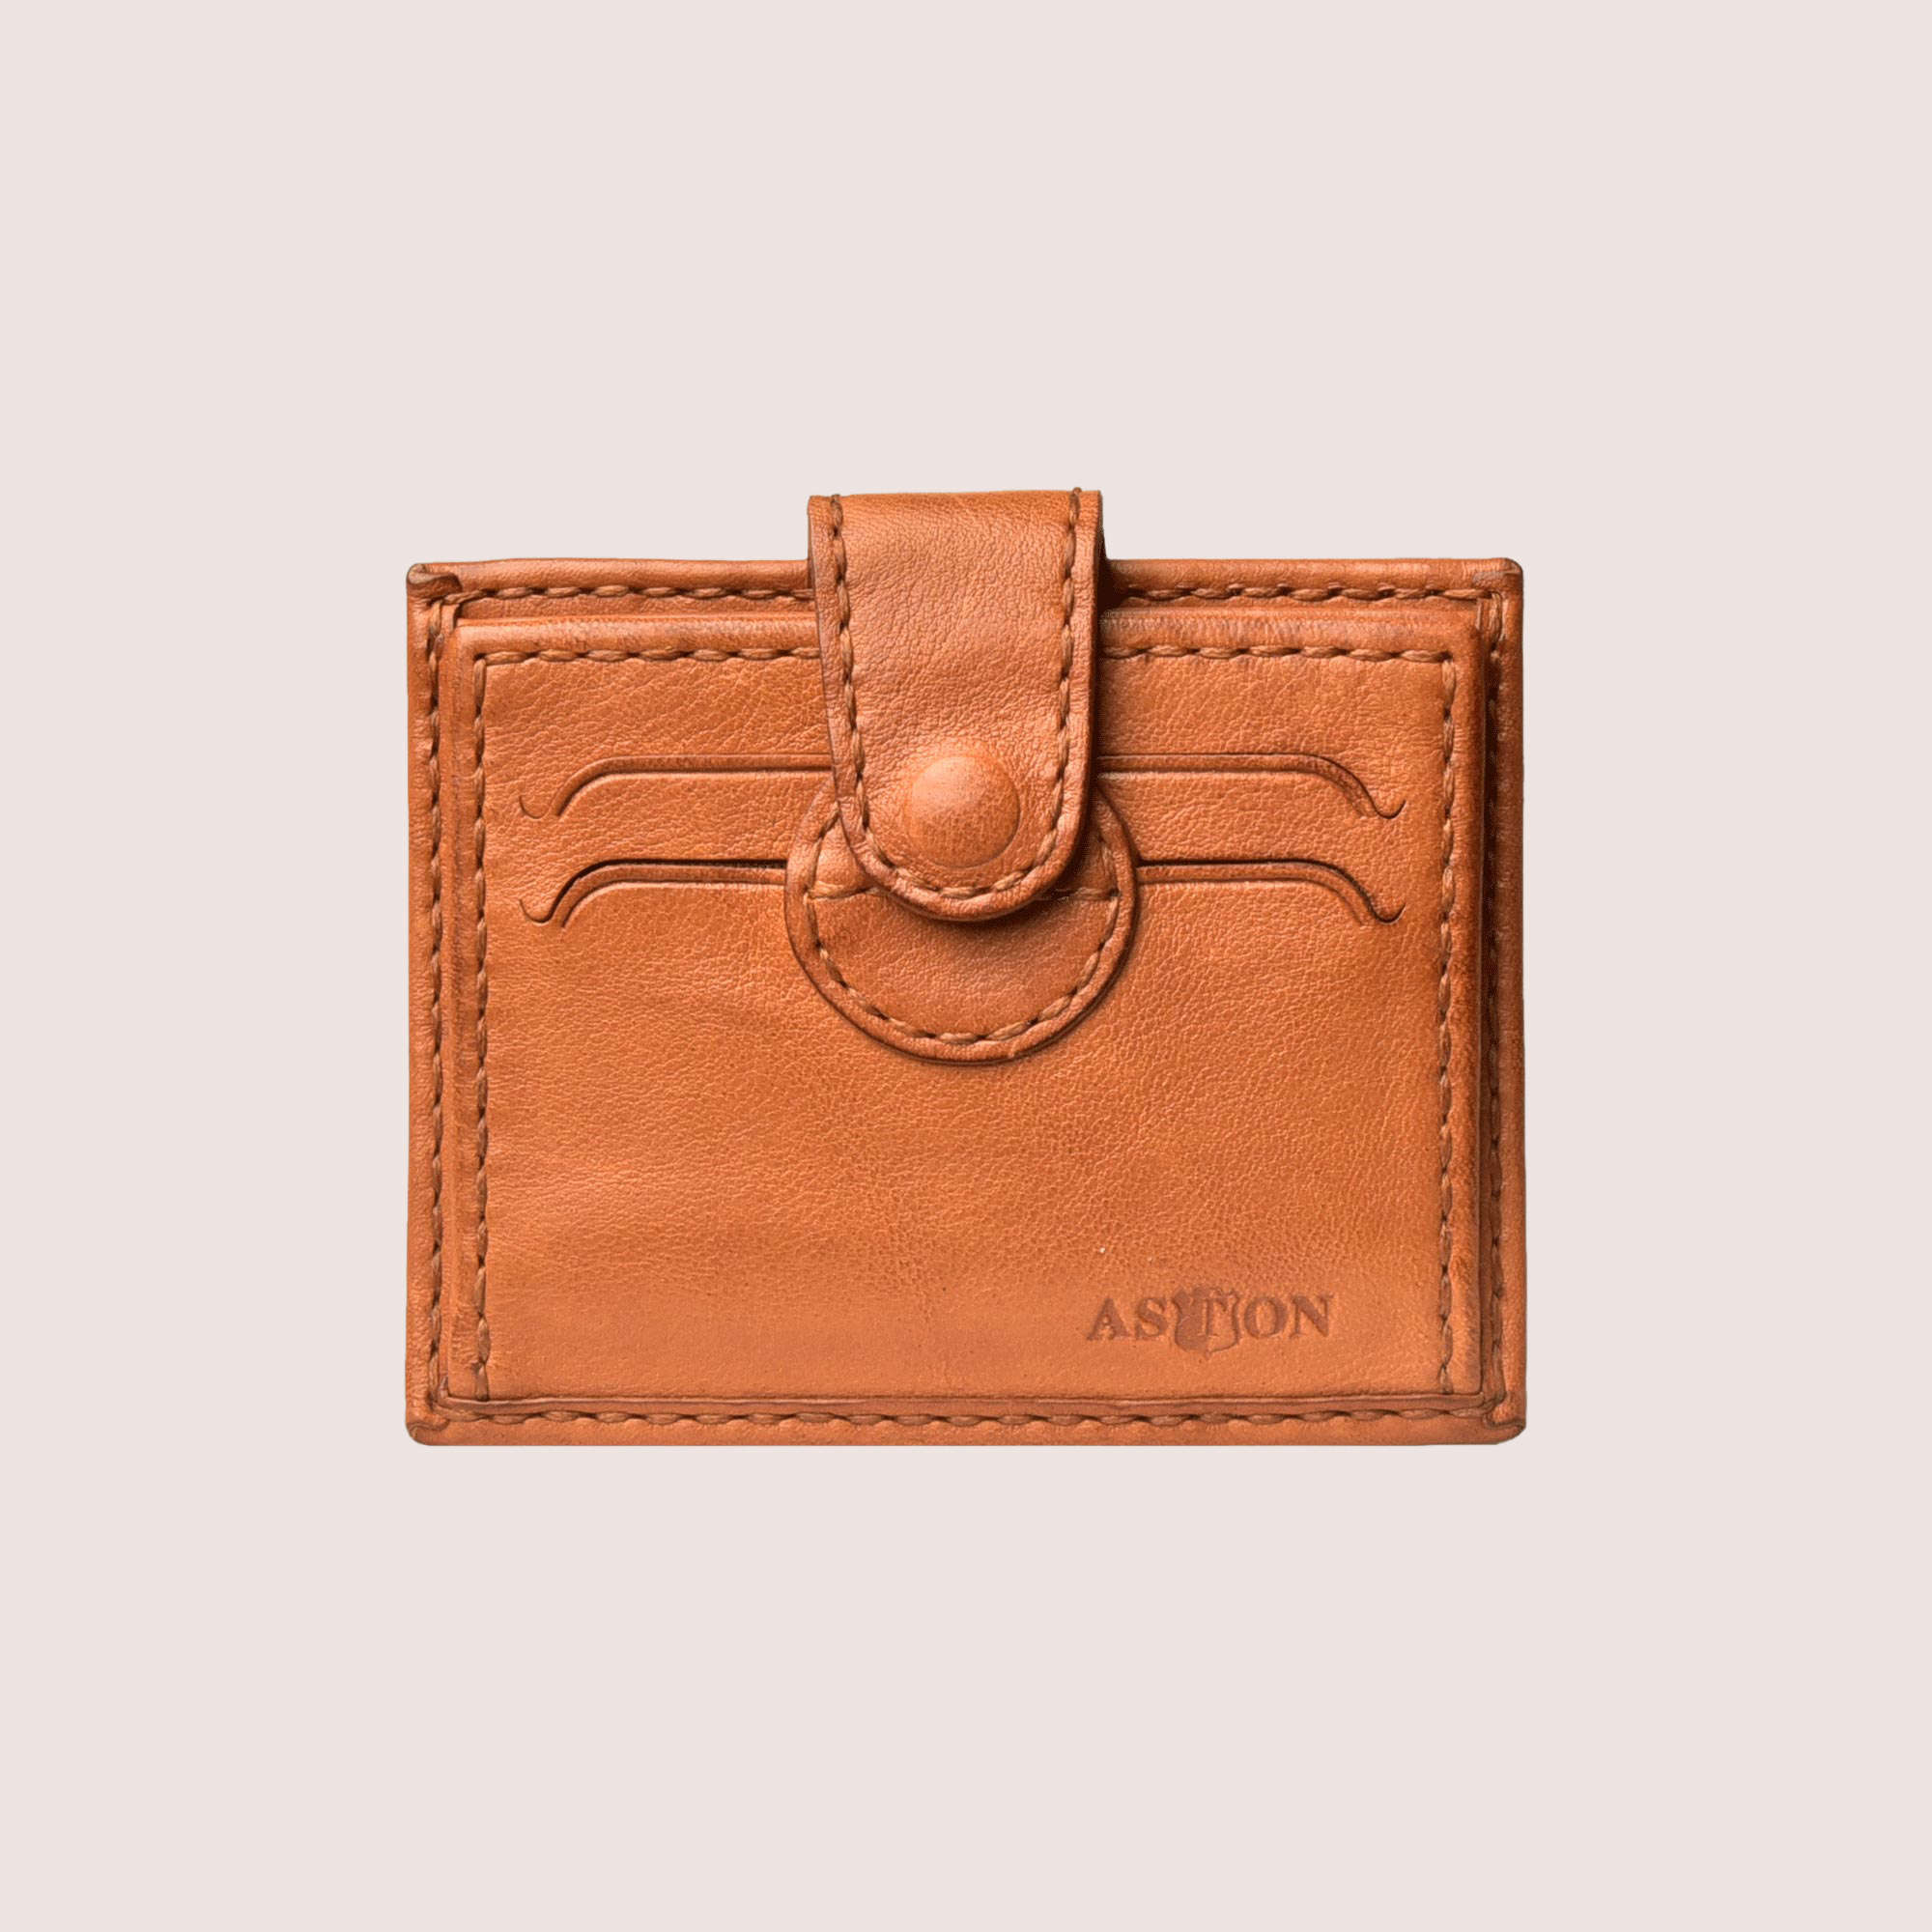 McCullers Hand-Stitched Wallet